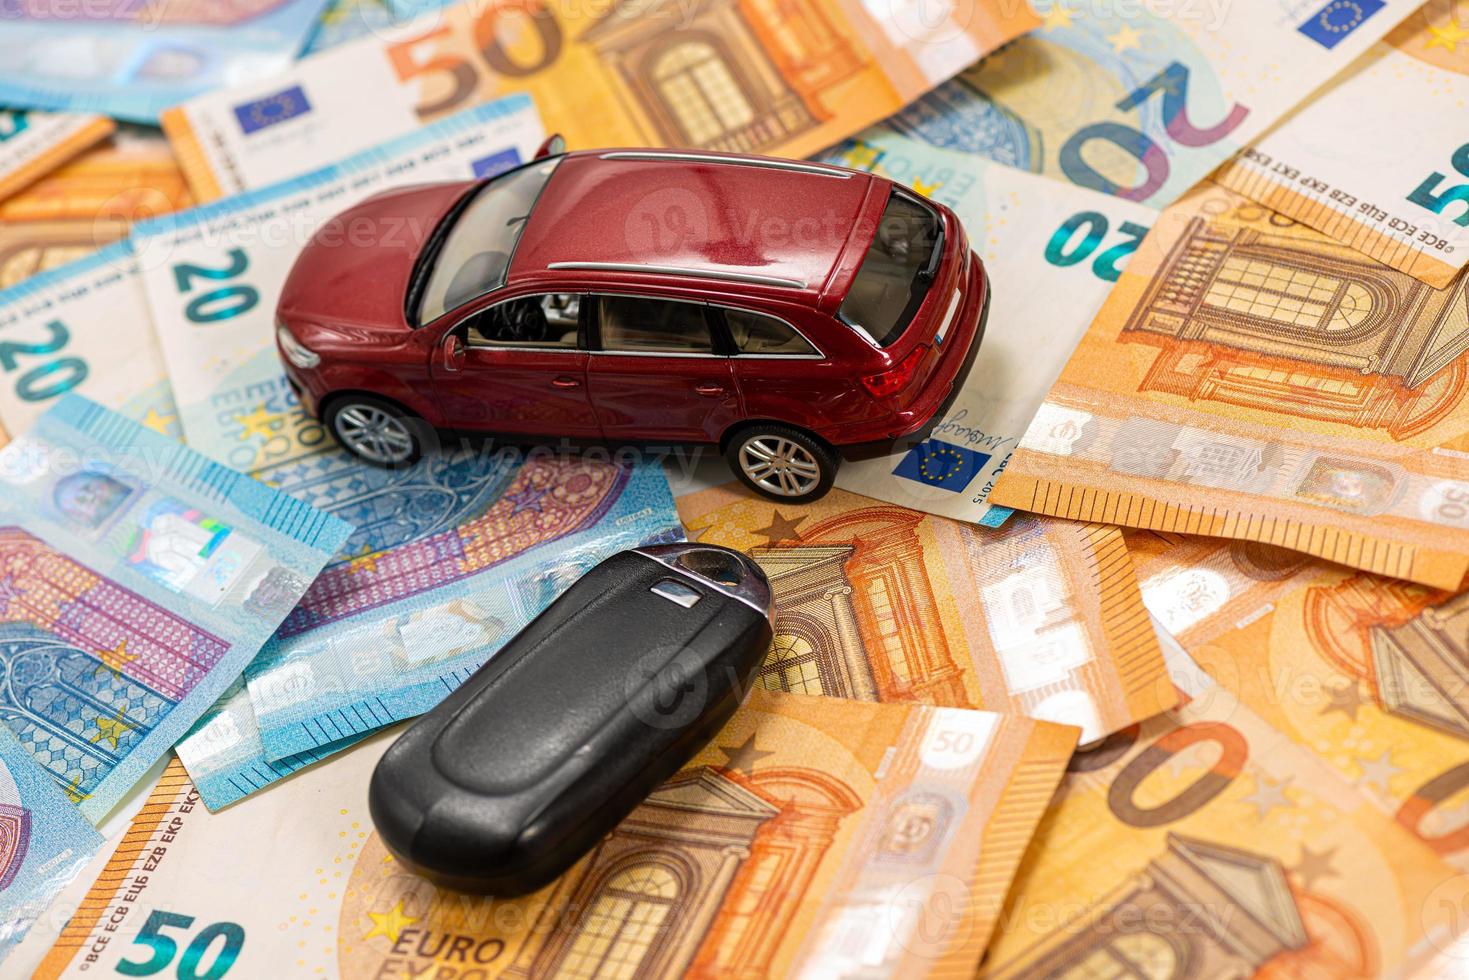 Key and red toy car on pile of Euro banknotes photo